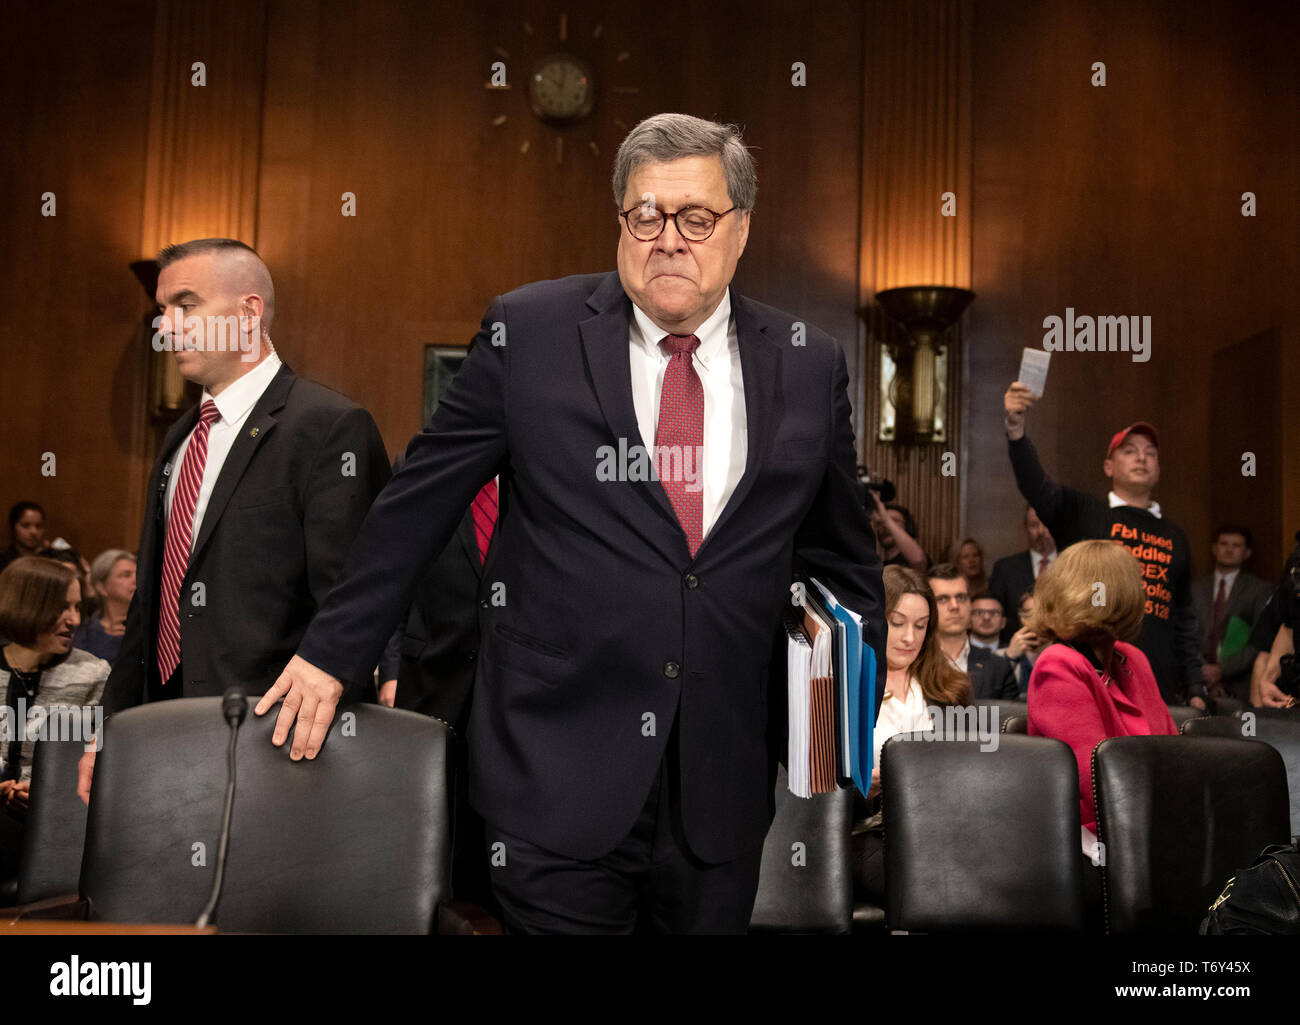 United States Attorney General William P. Barr is sworn-in to give testimony before the US Senate Committee on the Judiciary on the “Department of Justice’s Investigation of Russian Interference with the 2016 Presidential Election” on Capitol Hill in Washington, DC on May 1, 2019. The hearing will begin to answer questions about how the DOJ handled the conclusions from the Mueller probe.  Credit: Ron Sachs / CNP/ MediaPunch RESTRICTION: No New York Metro or other Newspapers within a 75 mile radius of New York City Stock Photo